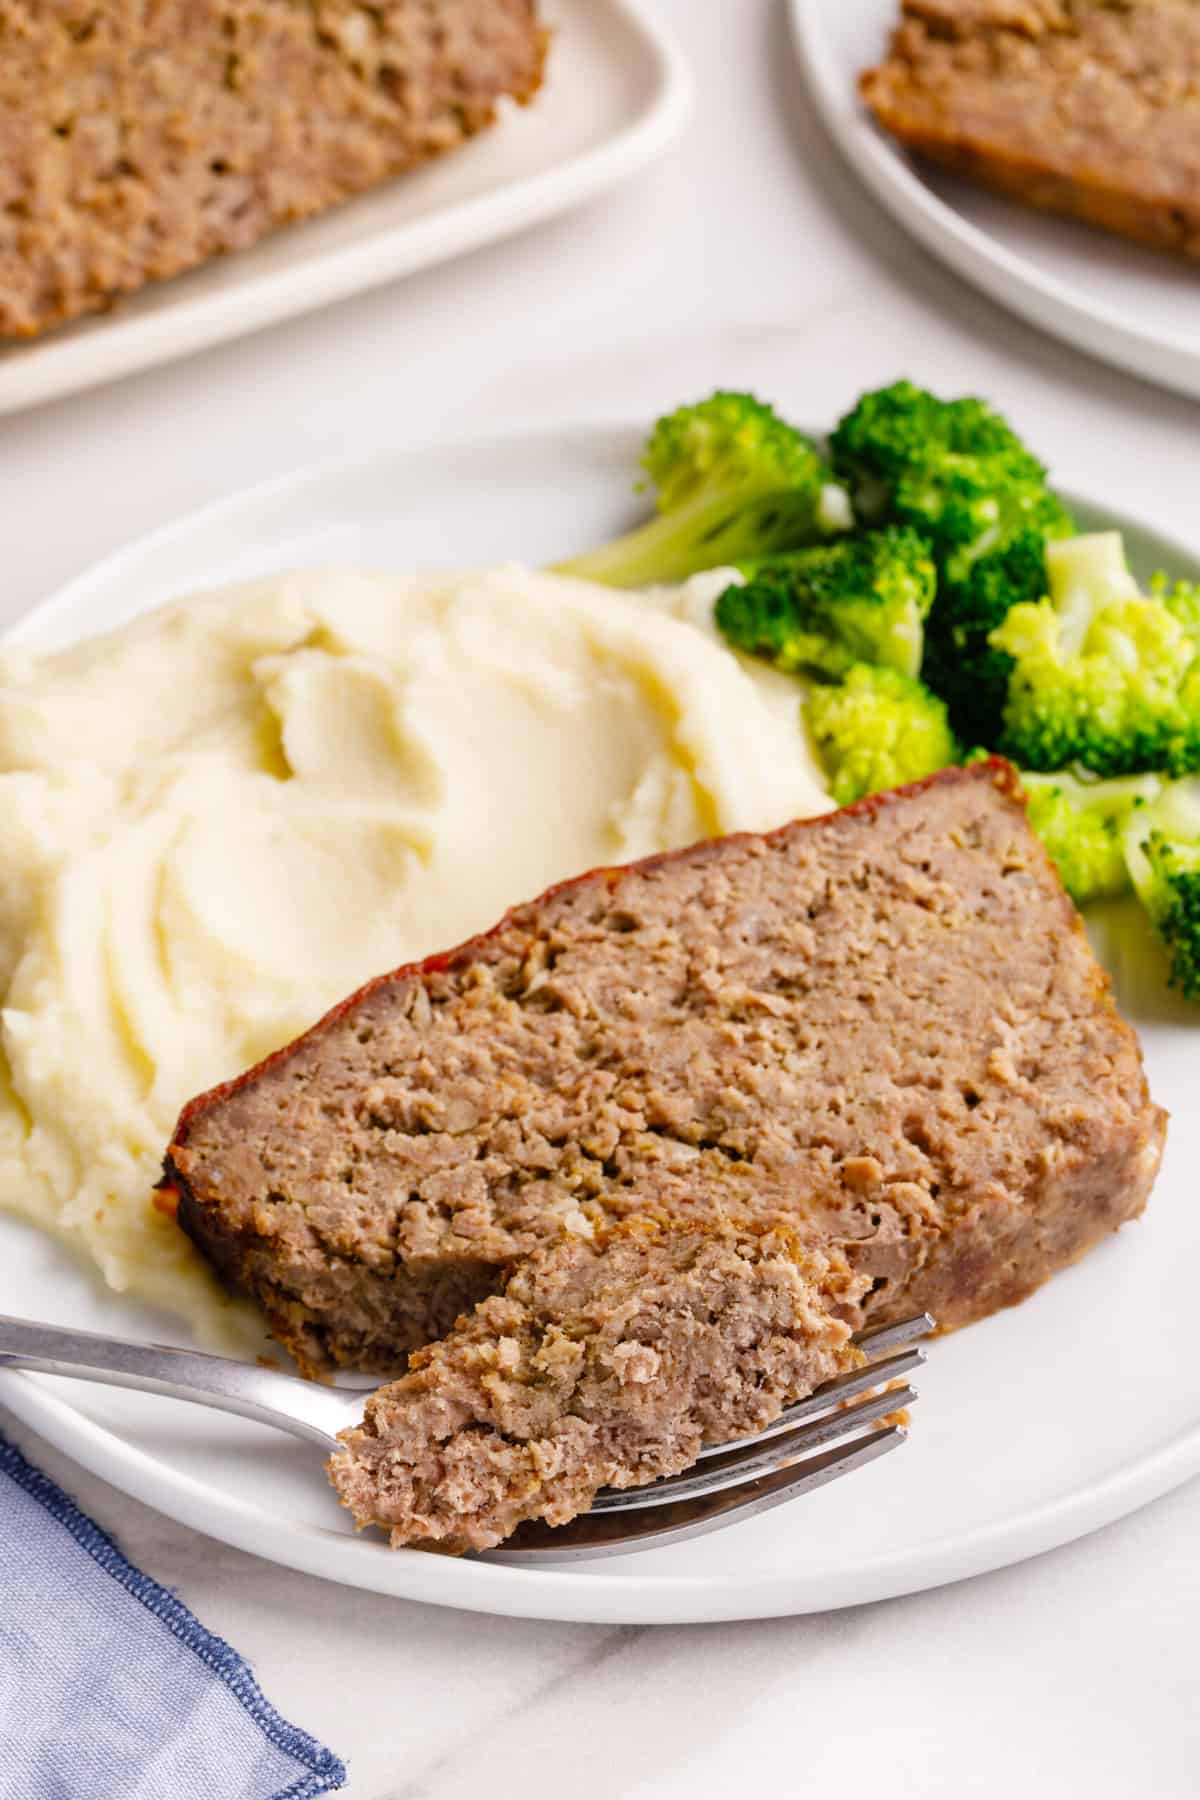 close up image of a plate of a serving of cracker barrel meatloaf, mashed potatoes and steamed broccoli.